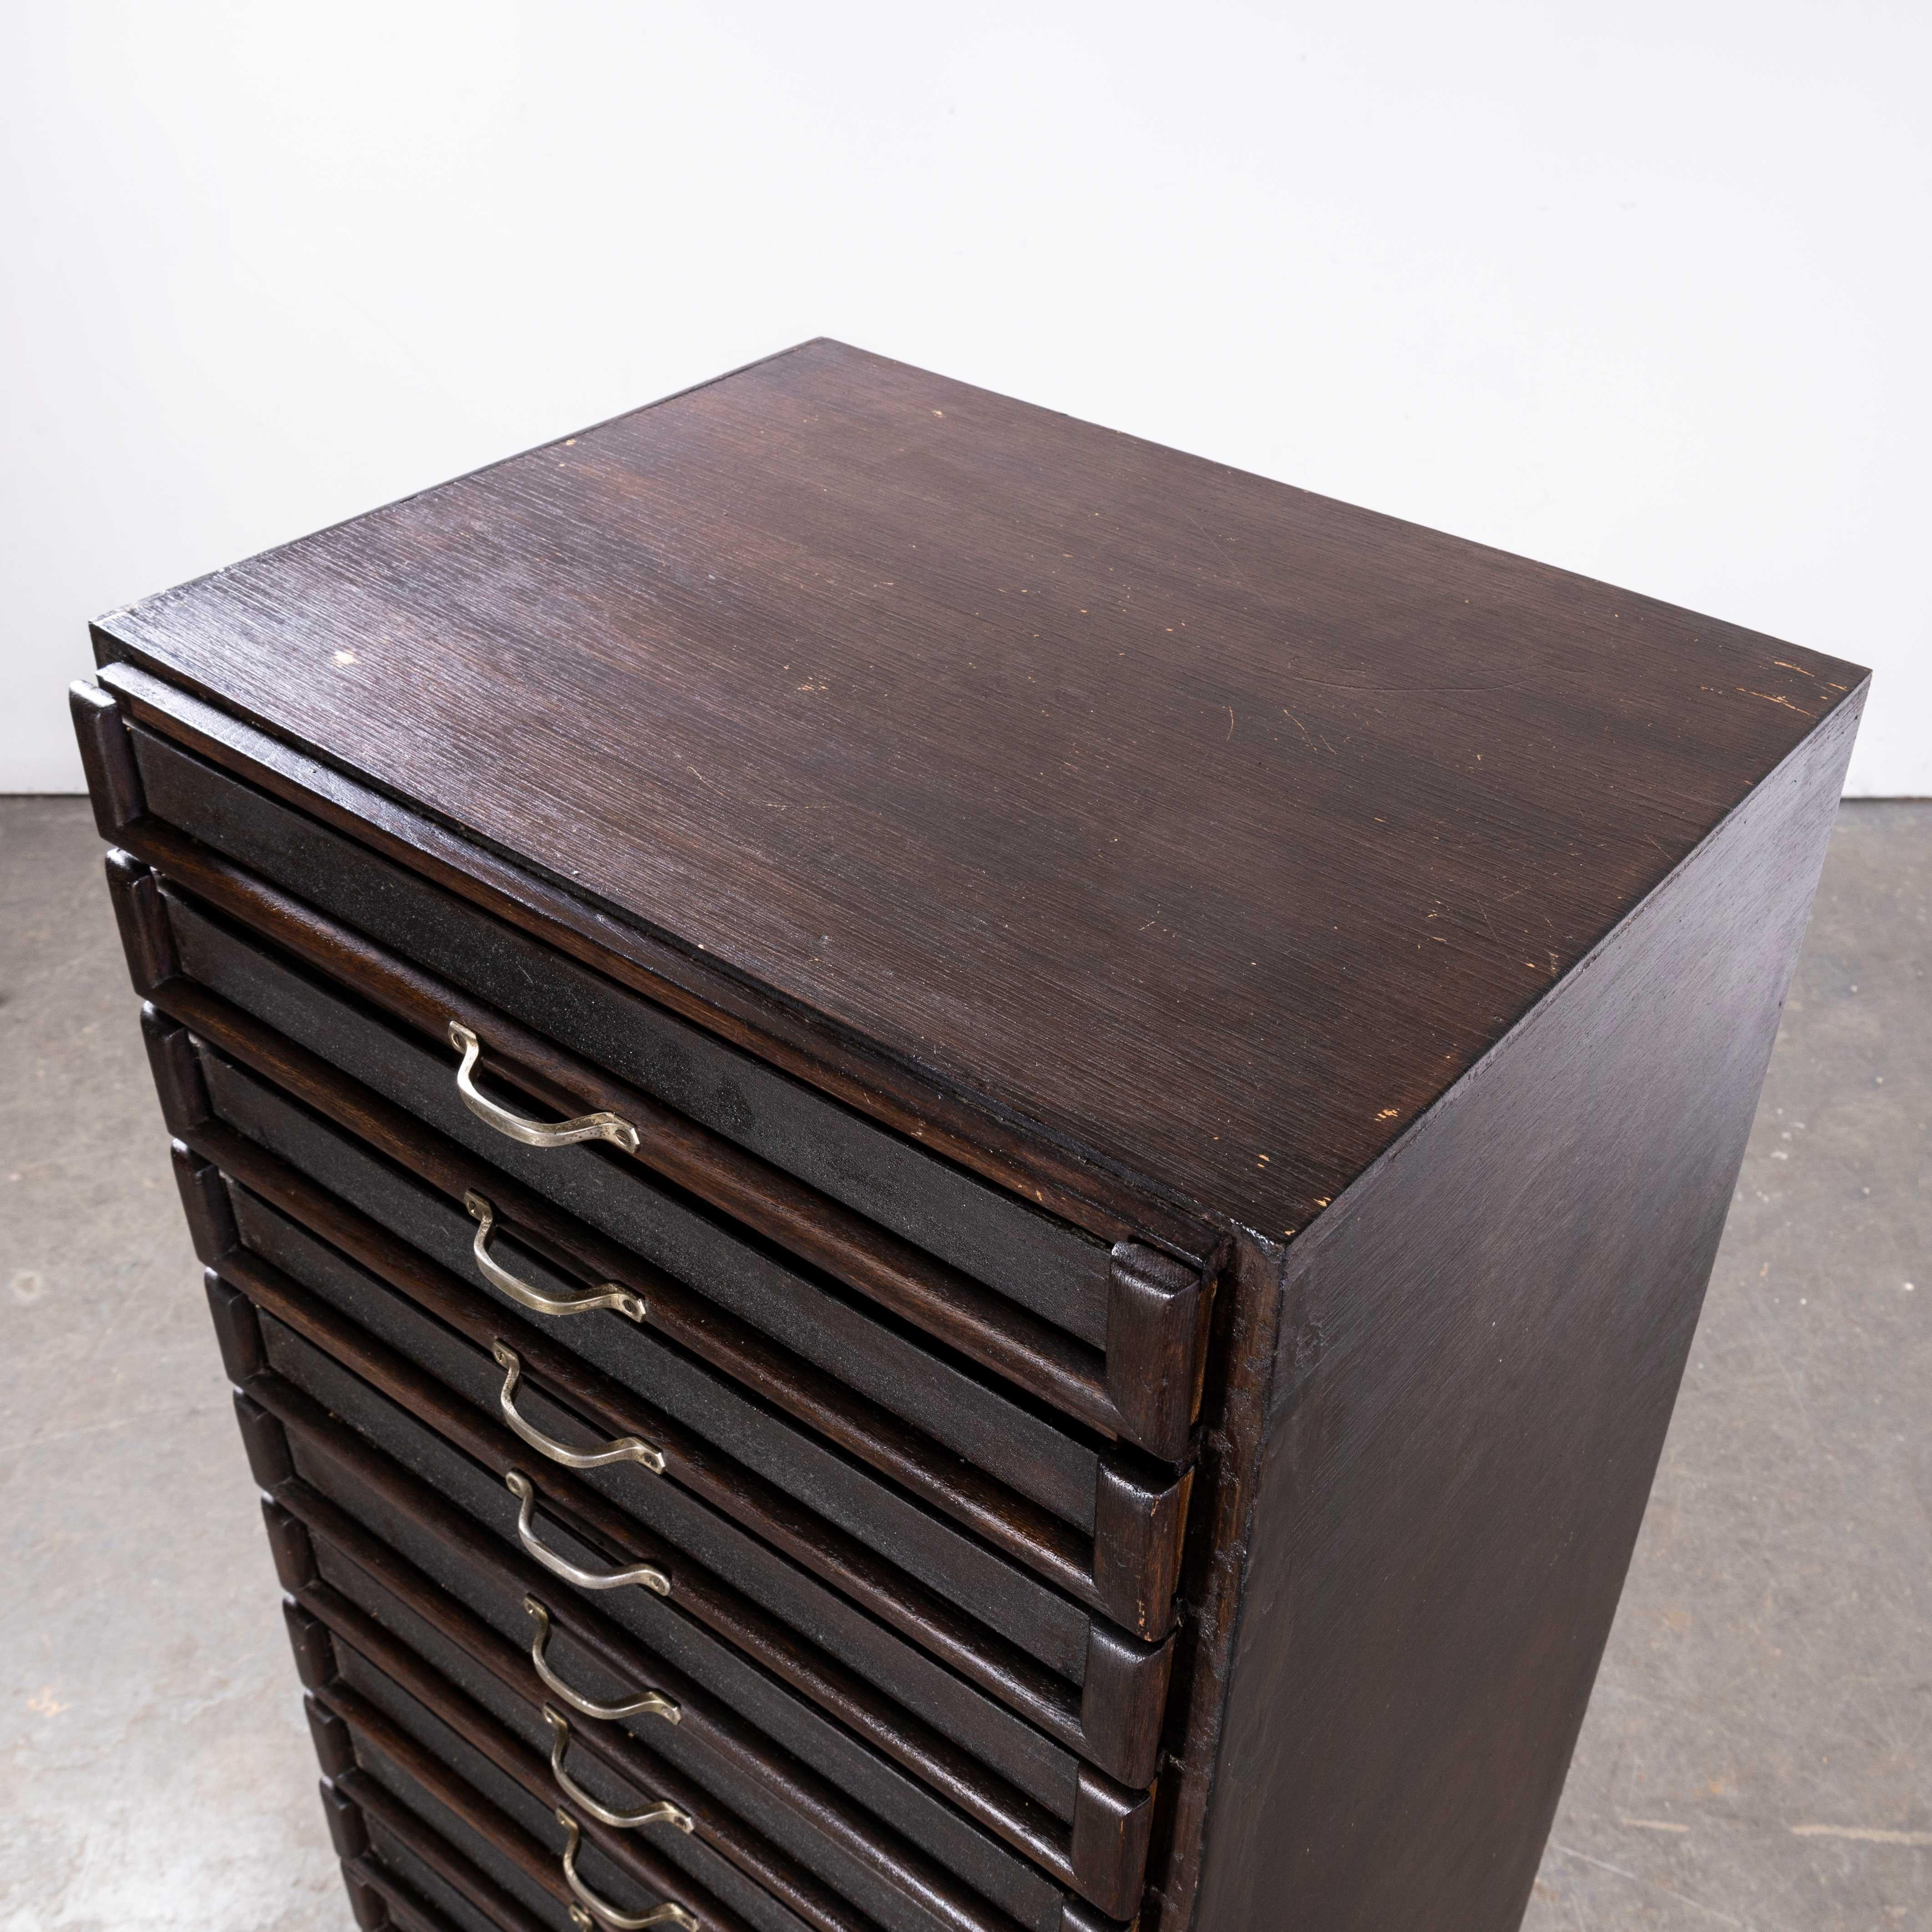 1930’s Multi Drawer Collectors Bank Of Drawers – Fifteen Drawers
1930’s Multi Drawer Collectors Bank Of Drawers – Fifteen Drawers. Good original bank of collectors drawers by the Dutch firm L.Scheepstra of Leeuwarden, Netherlands. Made of a dark